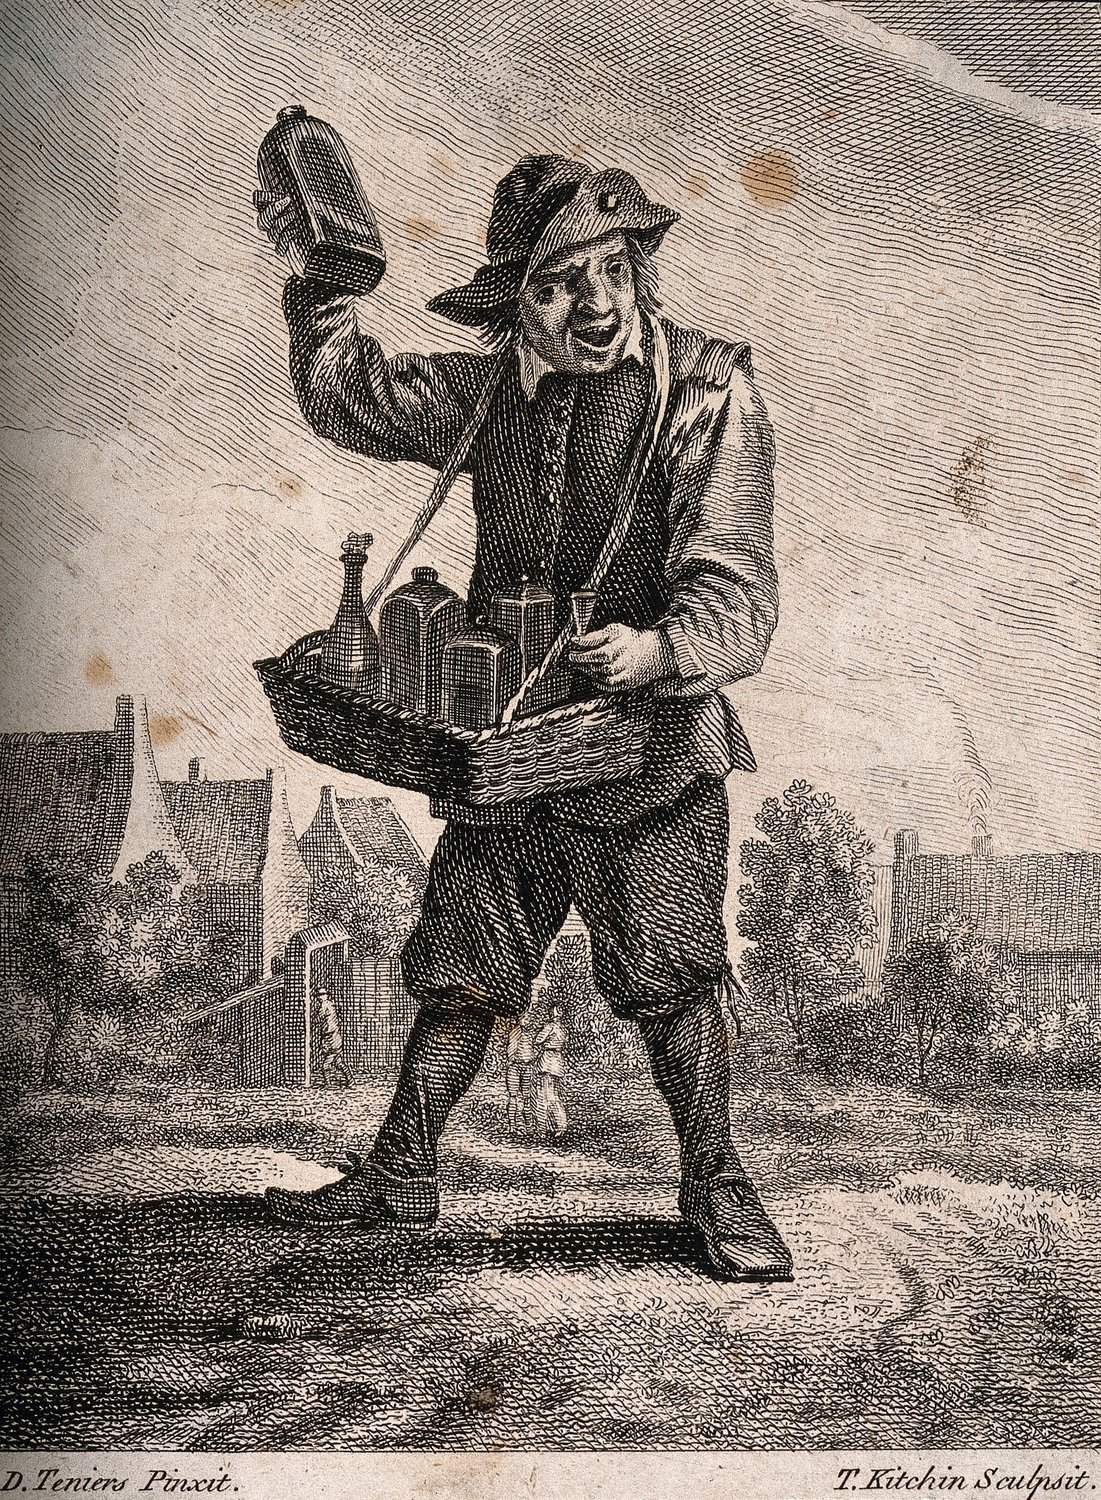 A country pedlar selling medicines from a basket. Etching by Thomas Kitchin after David Teniers the Younger. Image from Wellcome Images, operated by Wellcome Trust, a U.K.-based charitable foundation.